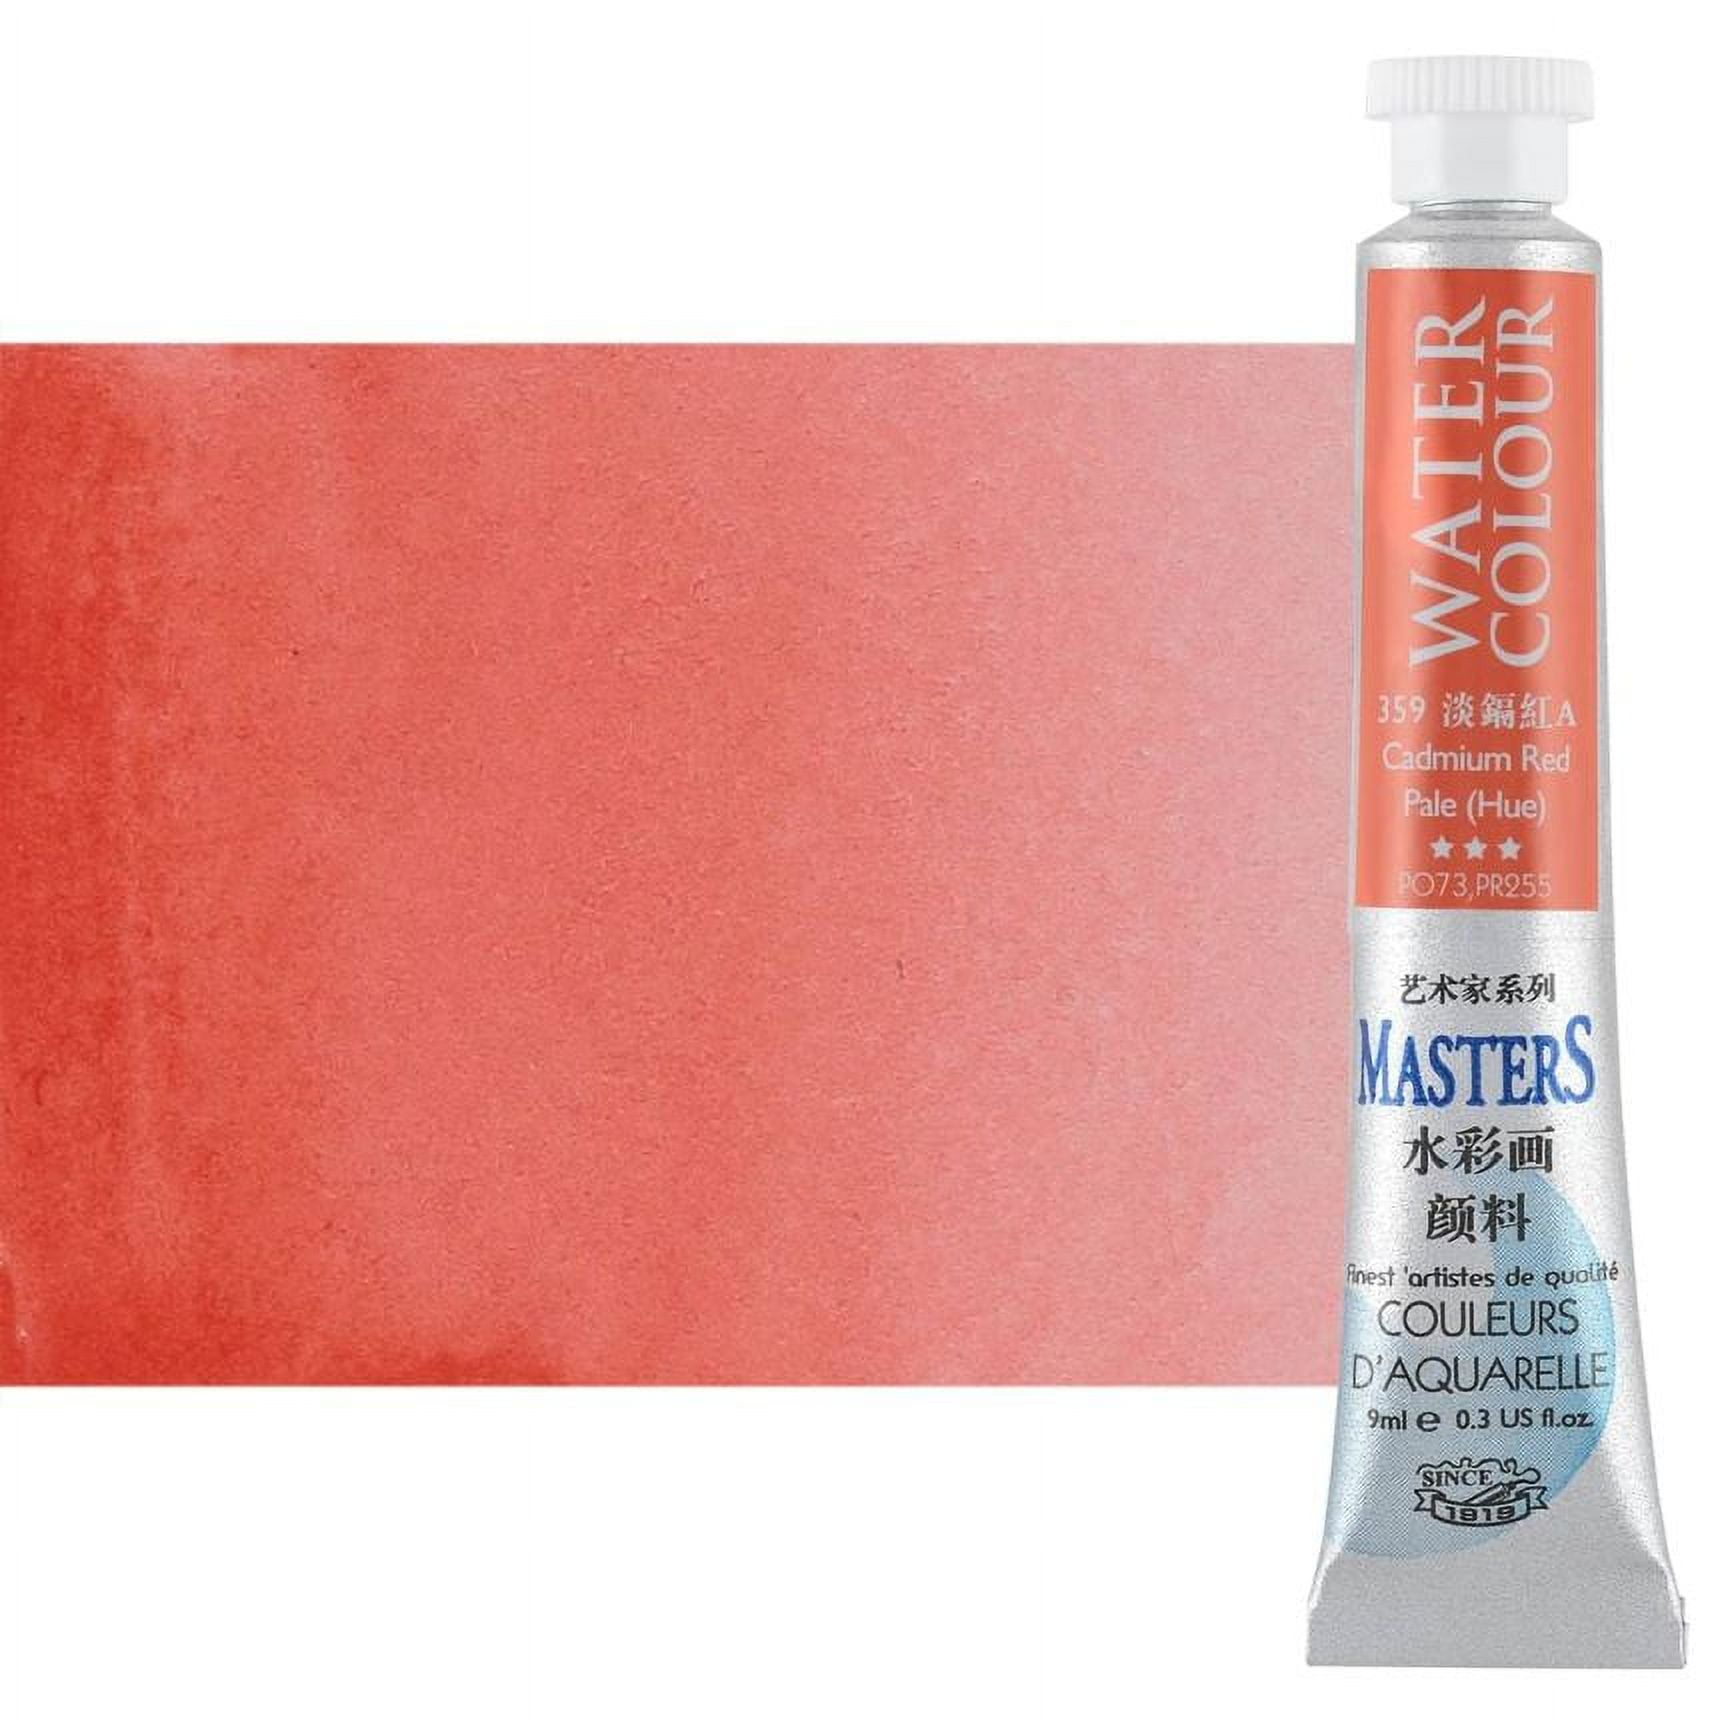 Marie's Watercolor Paint - Concentrated Color, Pure Pigments, High  Lightfastness Ratings Craft Paint for Artists - Rose Permanent Crimson  (9mL/0.3 oz) 